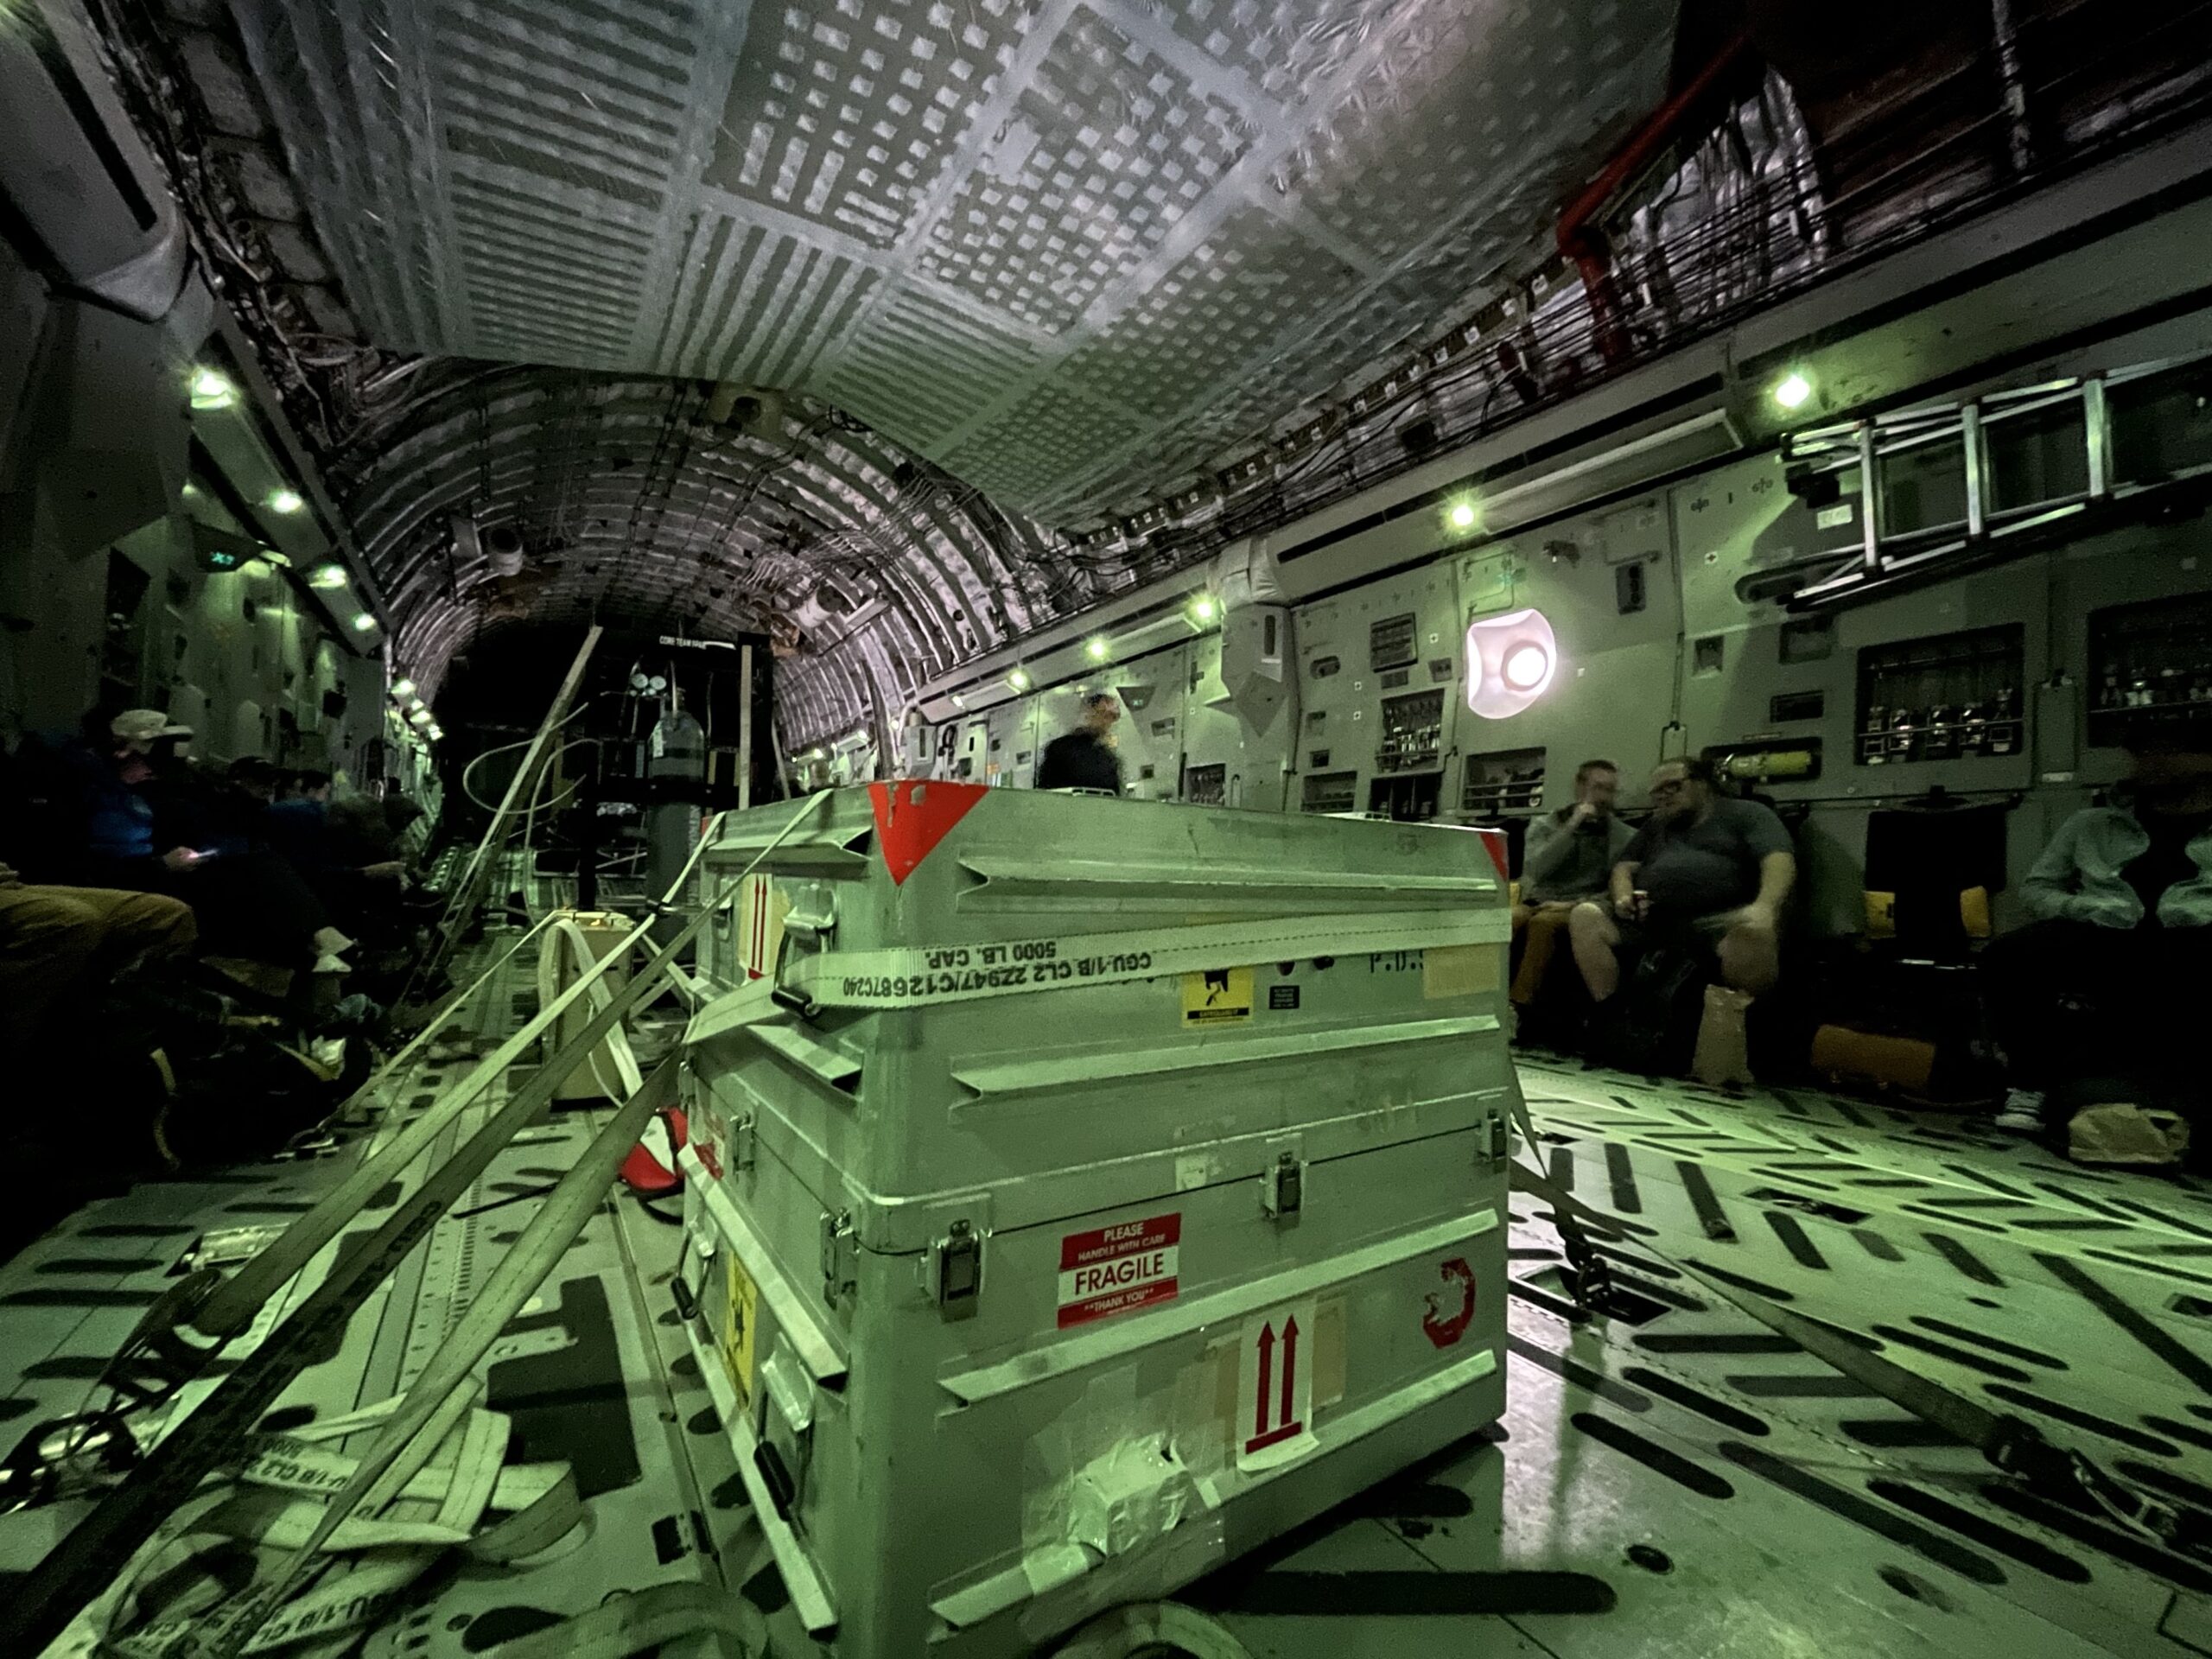 A metal box is strapped to the floor of an aircraft holding the